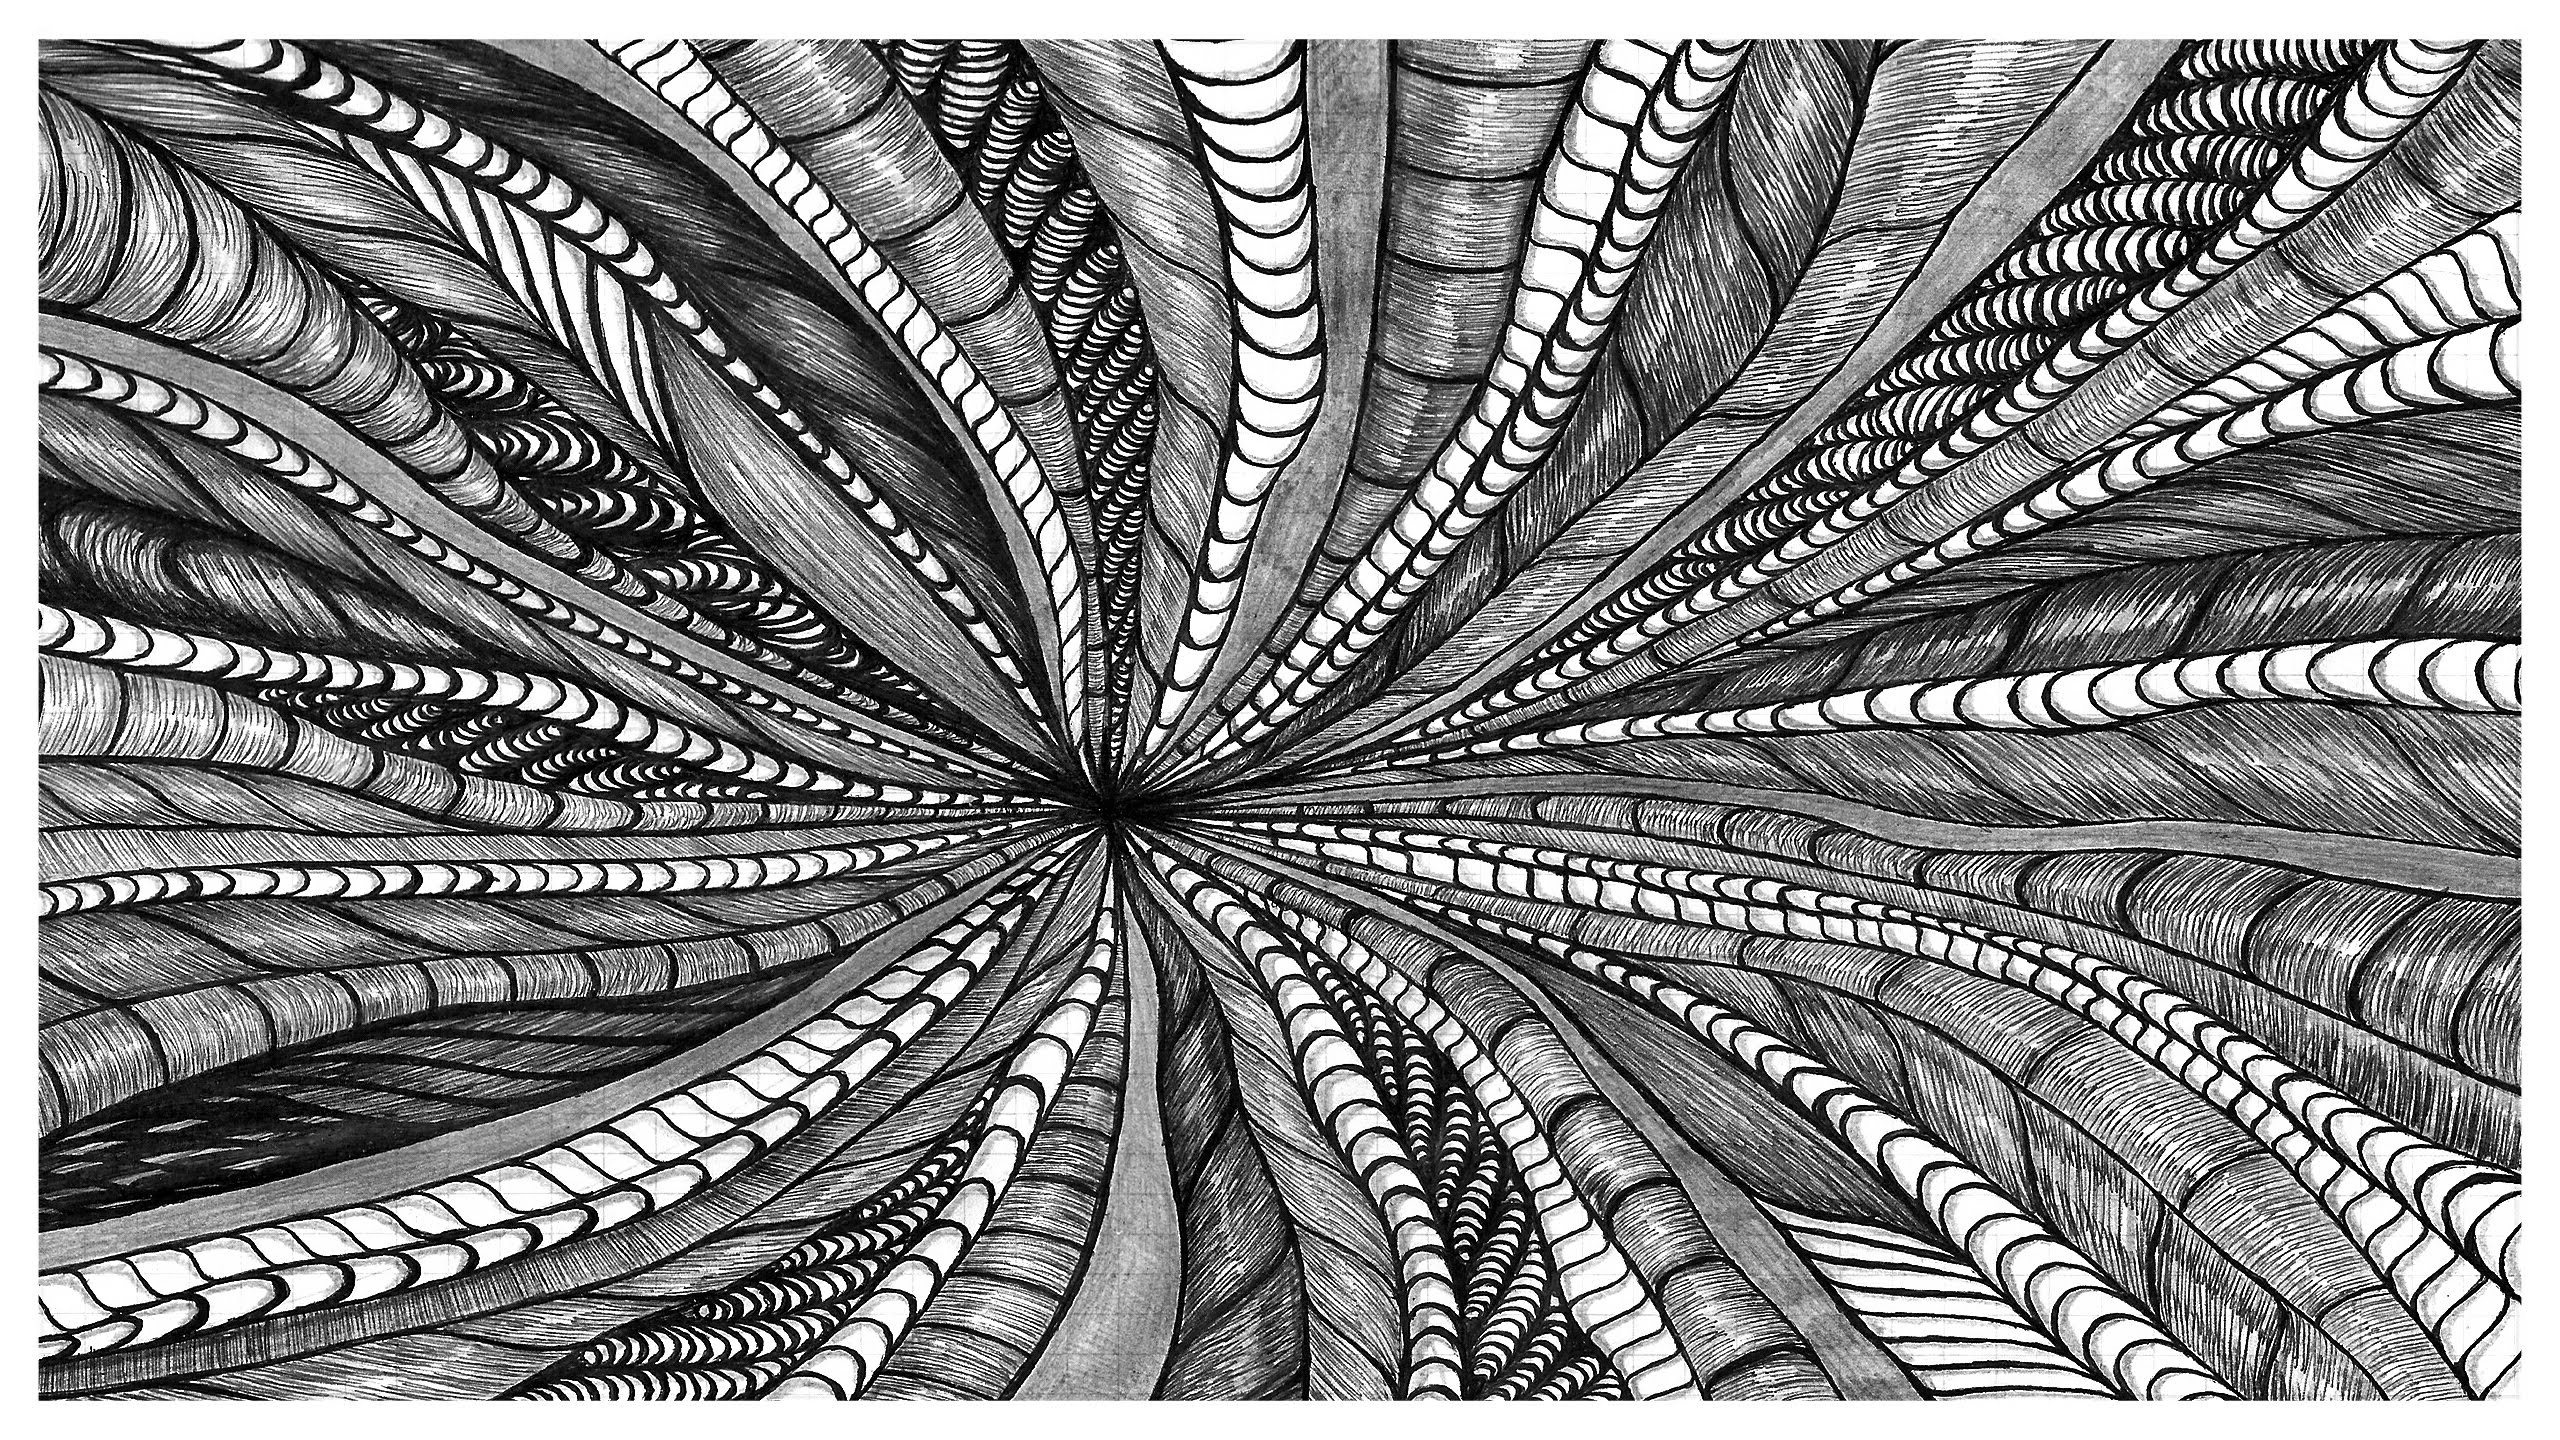 General 2560x1440 line art artwork pencil drawing pattern drawing shapes simple background abstract ink monochrome